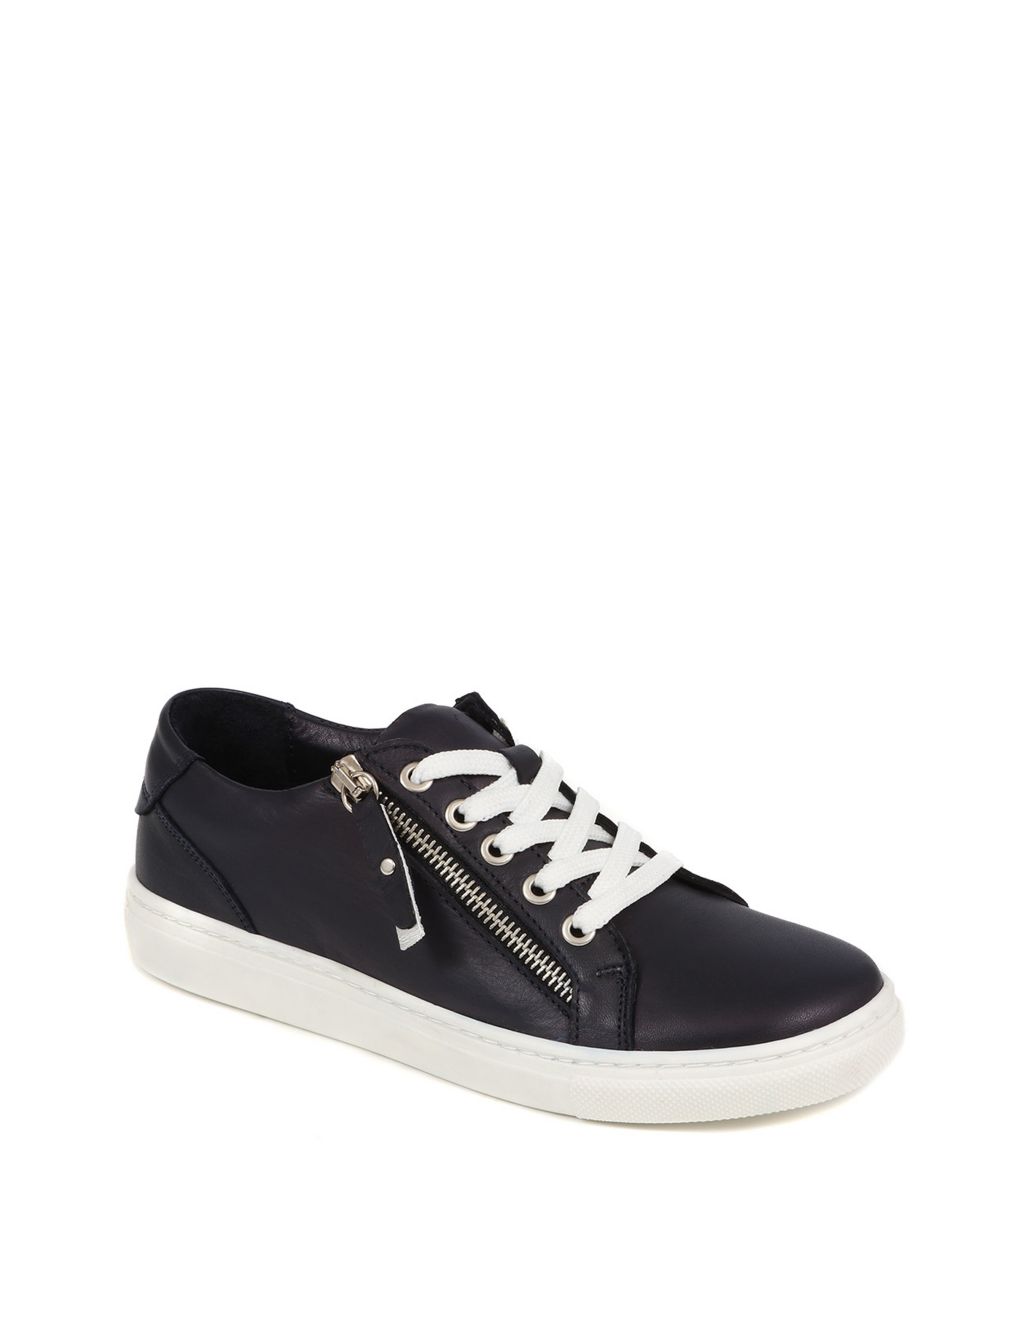 Leather Zip Up Trainers image 3